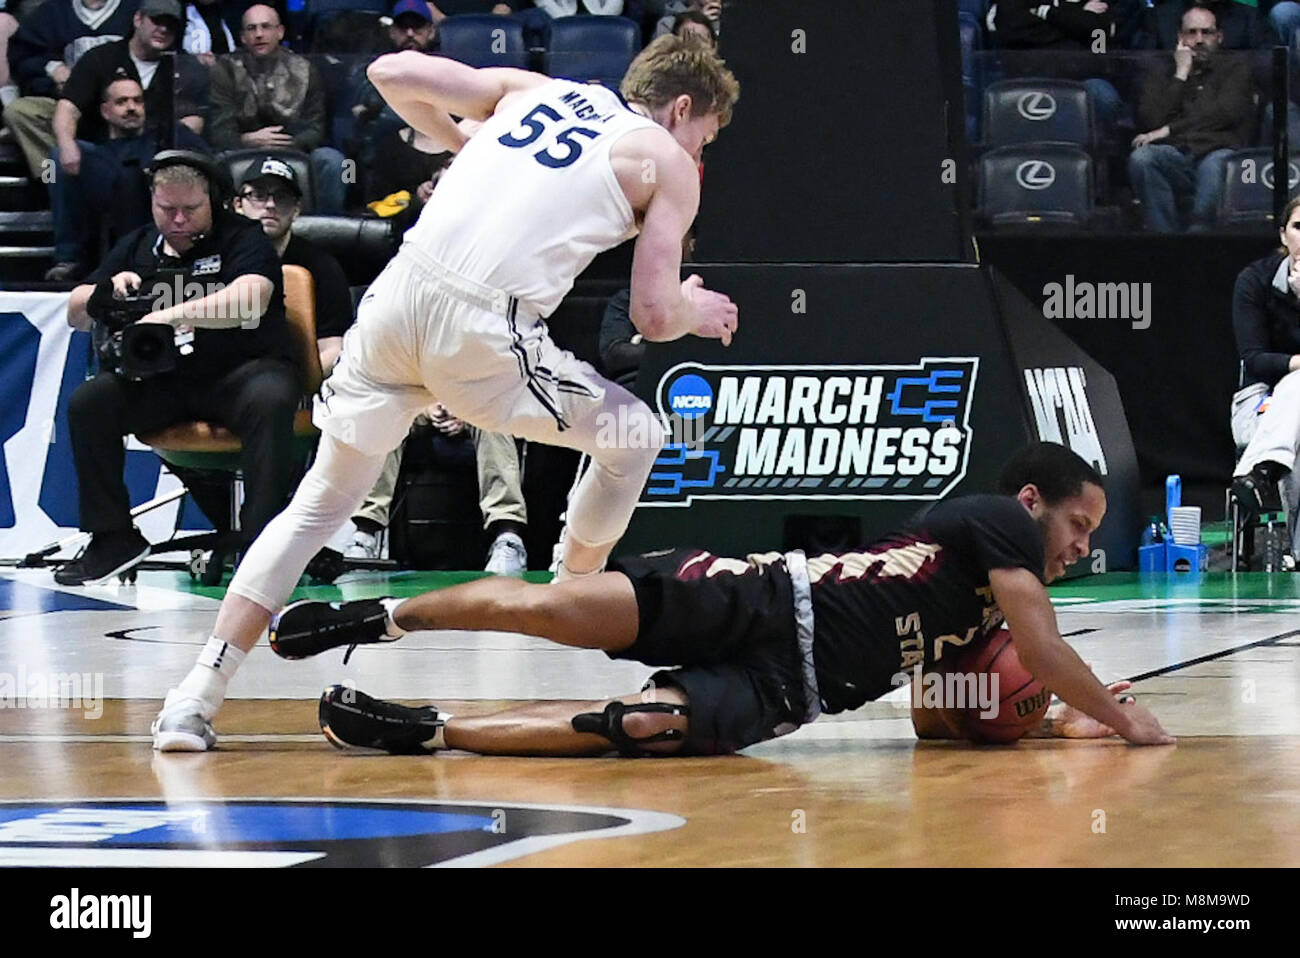 Nashville, Tennessee, USA. 18th Mar, 2018. Florida State Seminoles guard CJ Walker (2) and Xavier Musketeers guard J. P. Macura (55) battle for the ball at Bridgestone Arena on March 18, 2018 in Nashville, Tennessee. Credit: FGS Sports/Alamy Live News Stock Photo